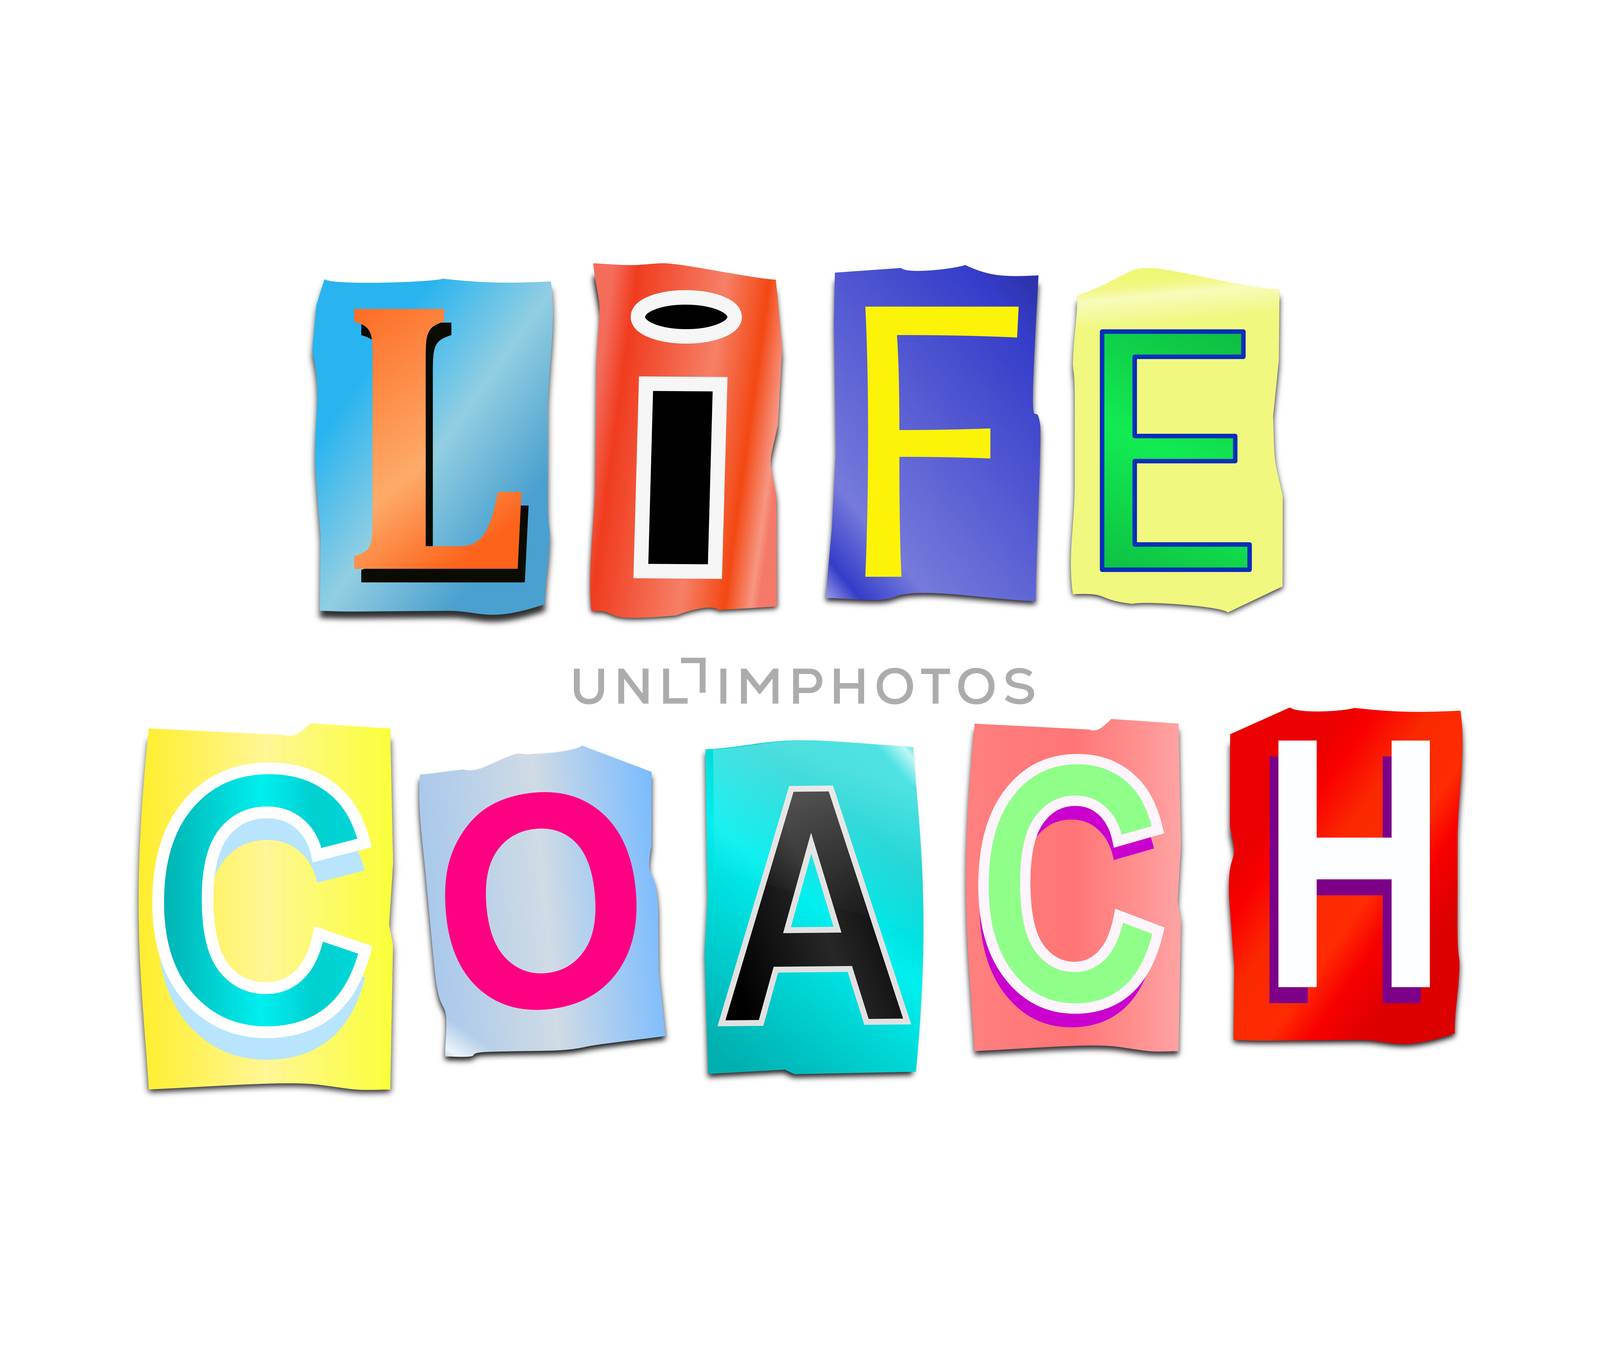 Illustration depicting a set of cut out printed letters arranged to form the words life coach.